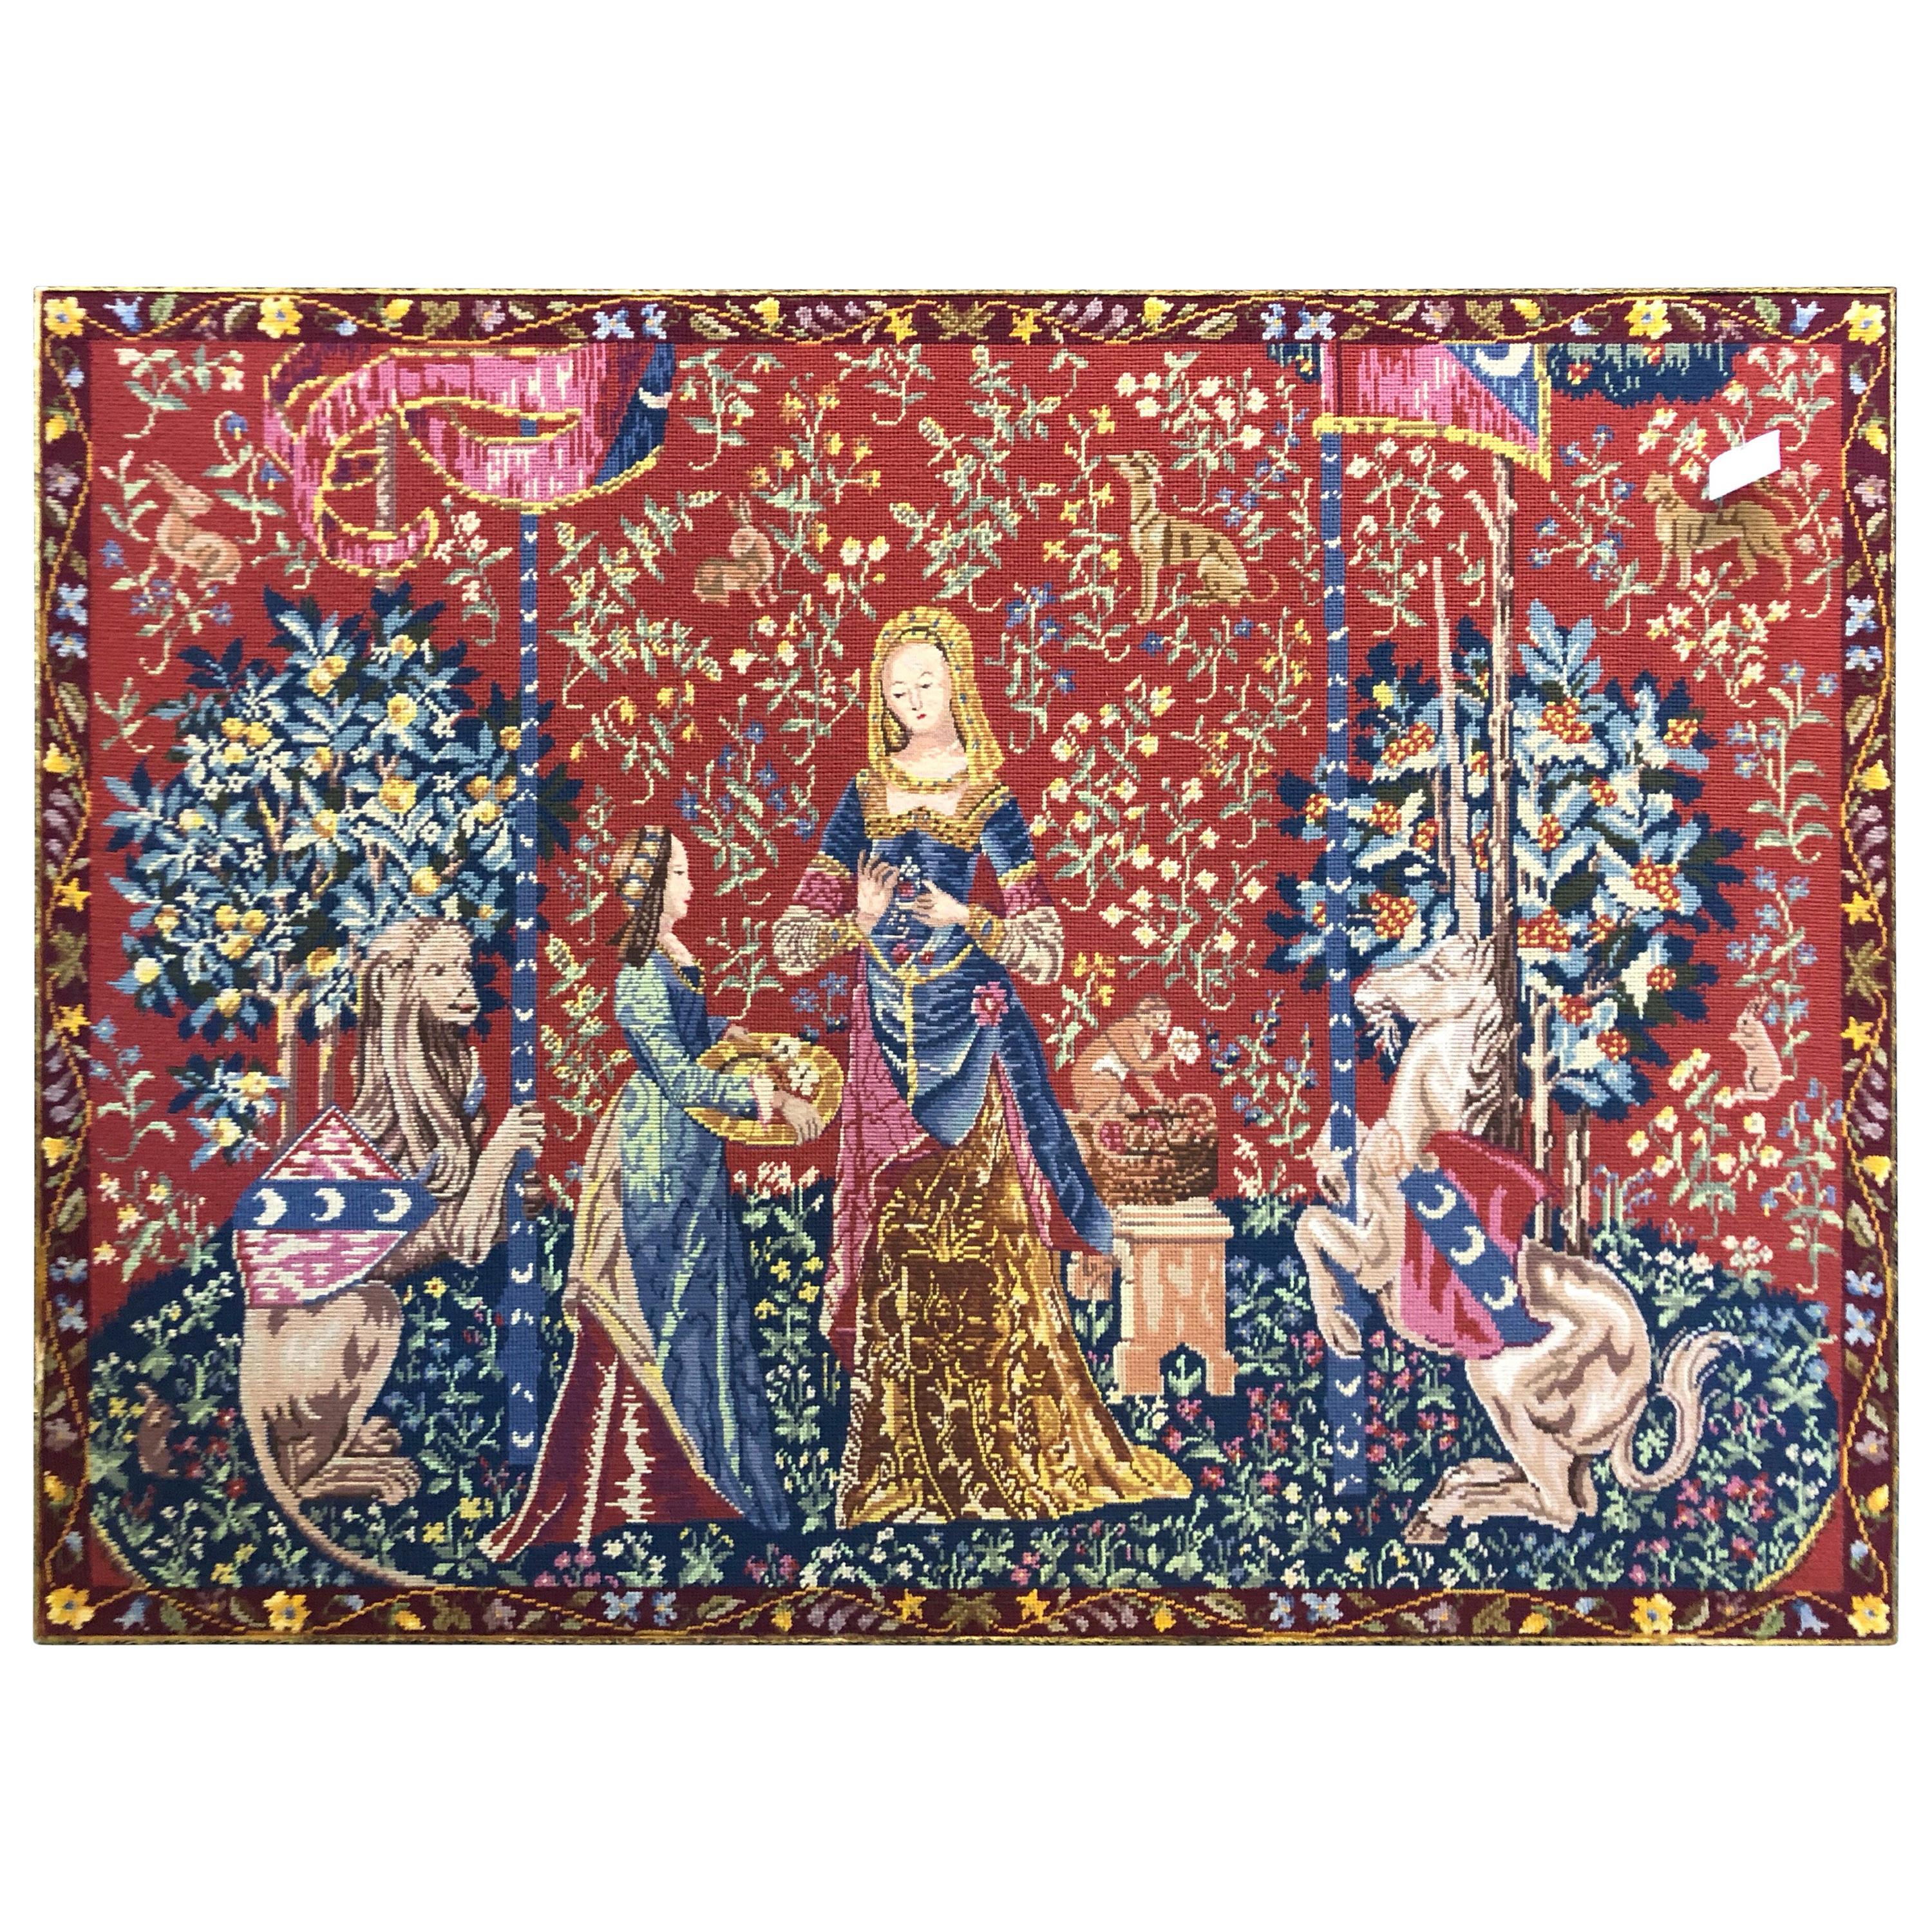 "The Lady and the Unicorn" Woven Flanders Tapestry in Style